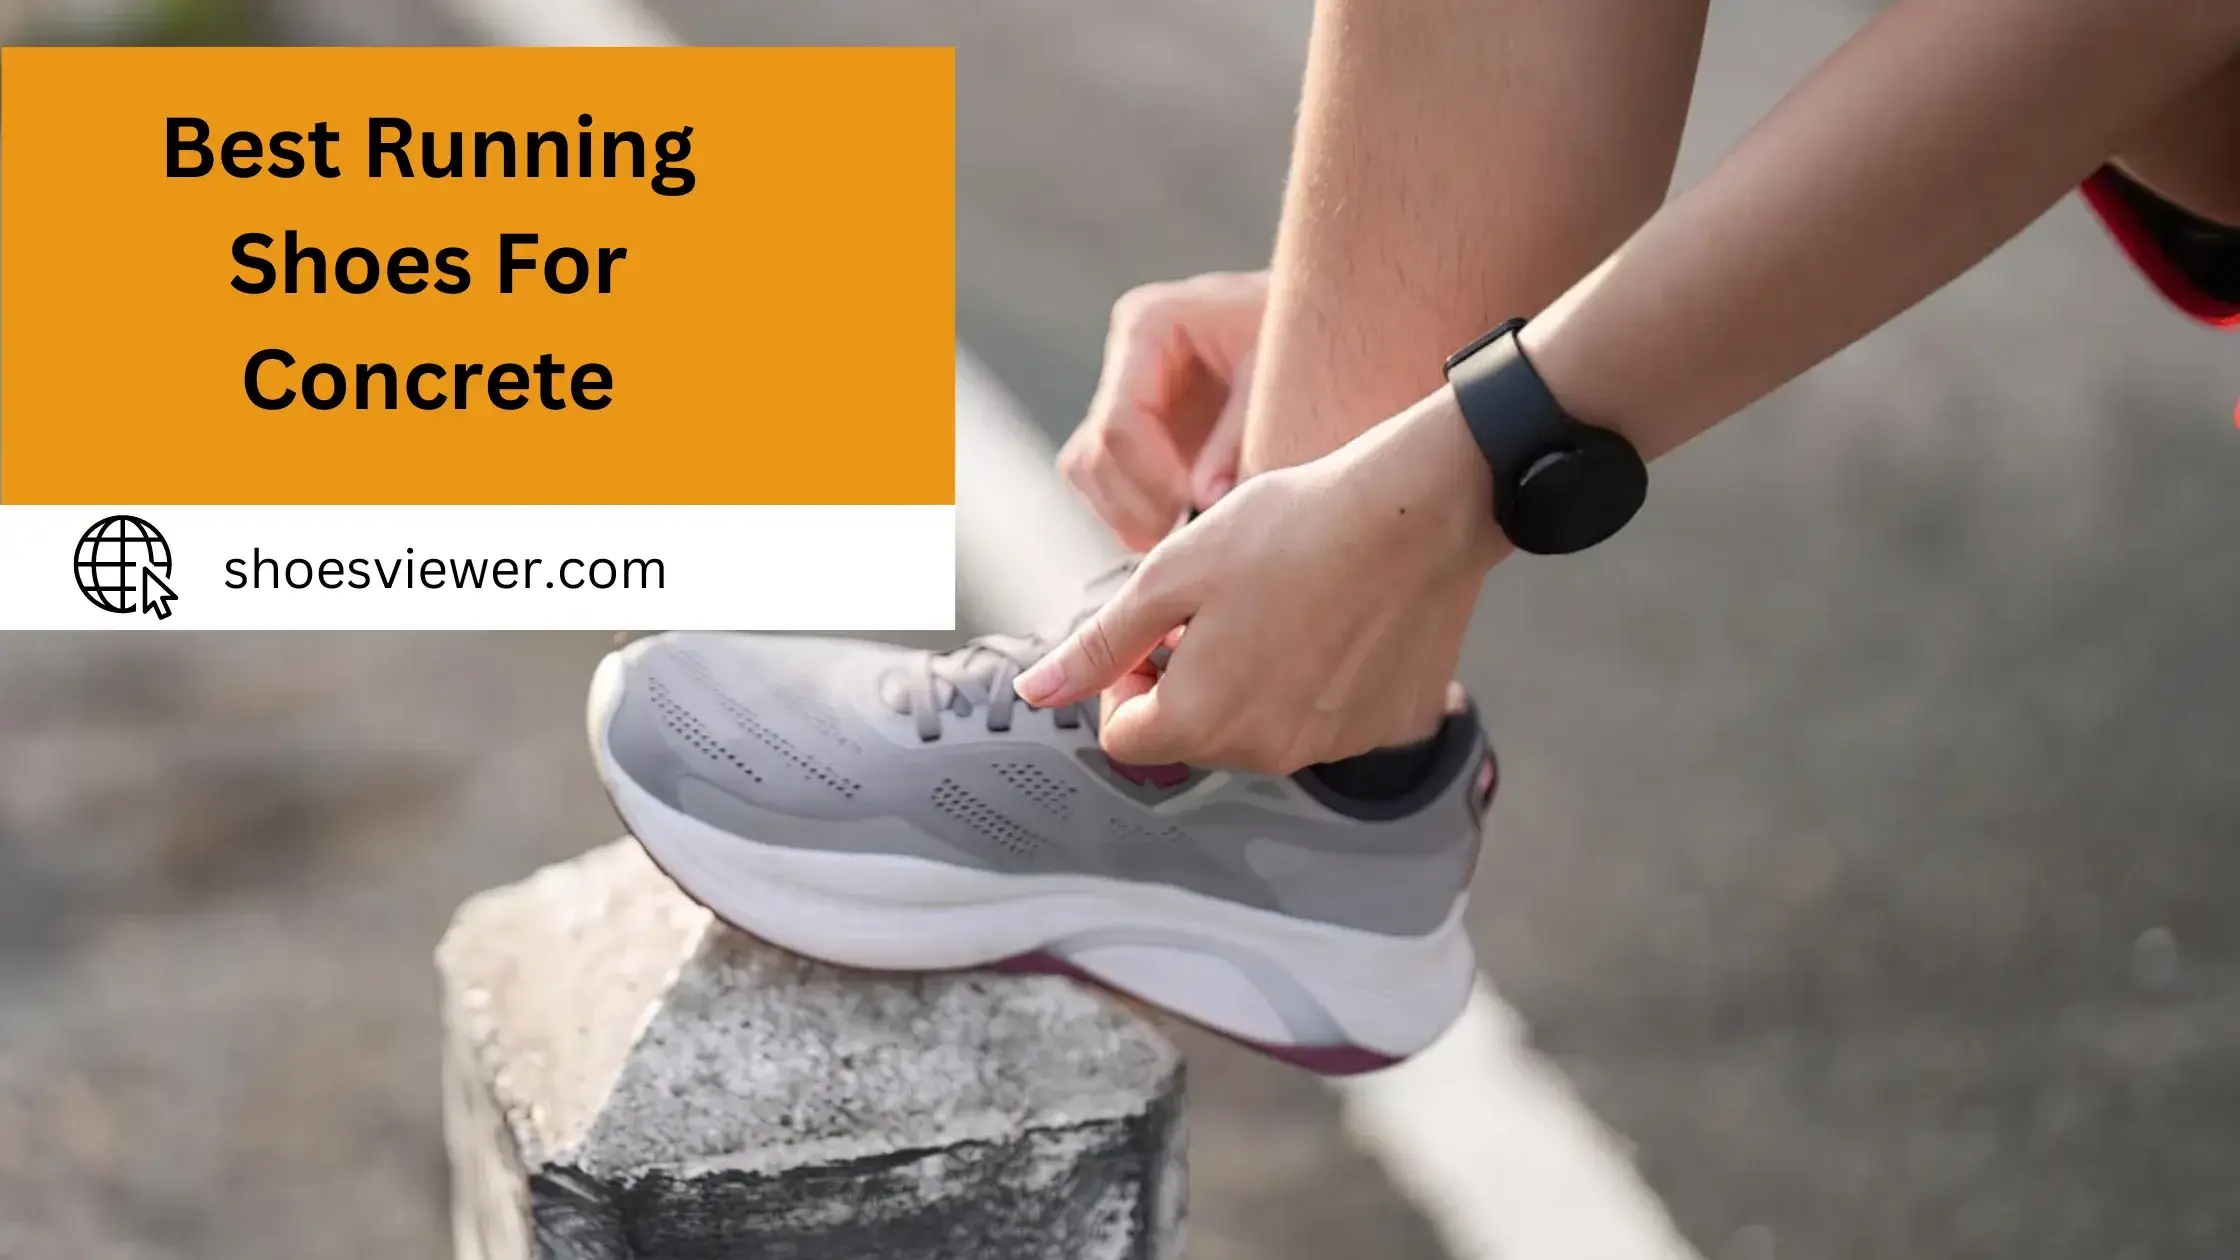 Best Running Shoes For Concrete - (An In-Depth Guide)